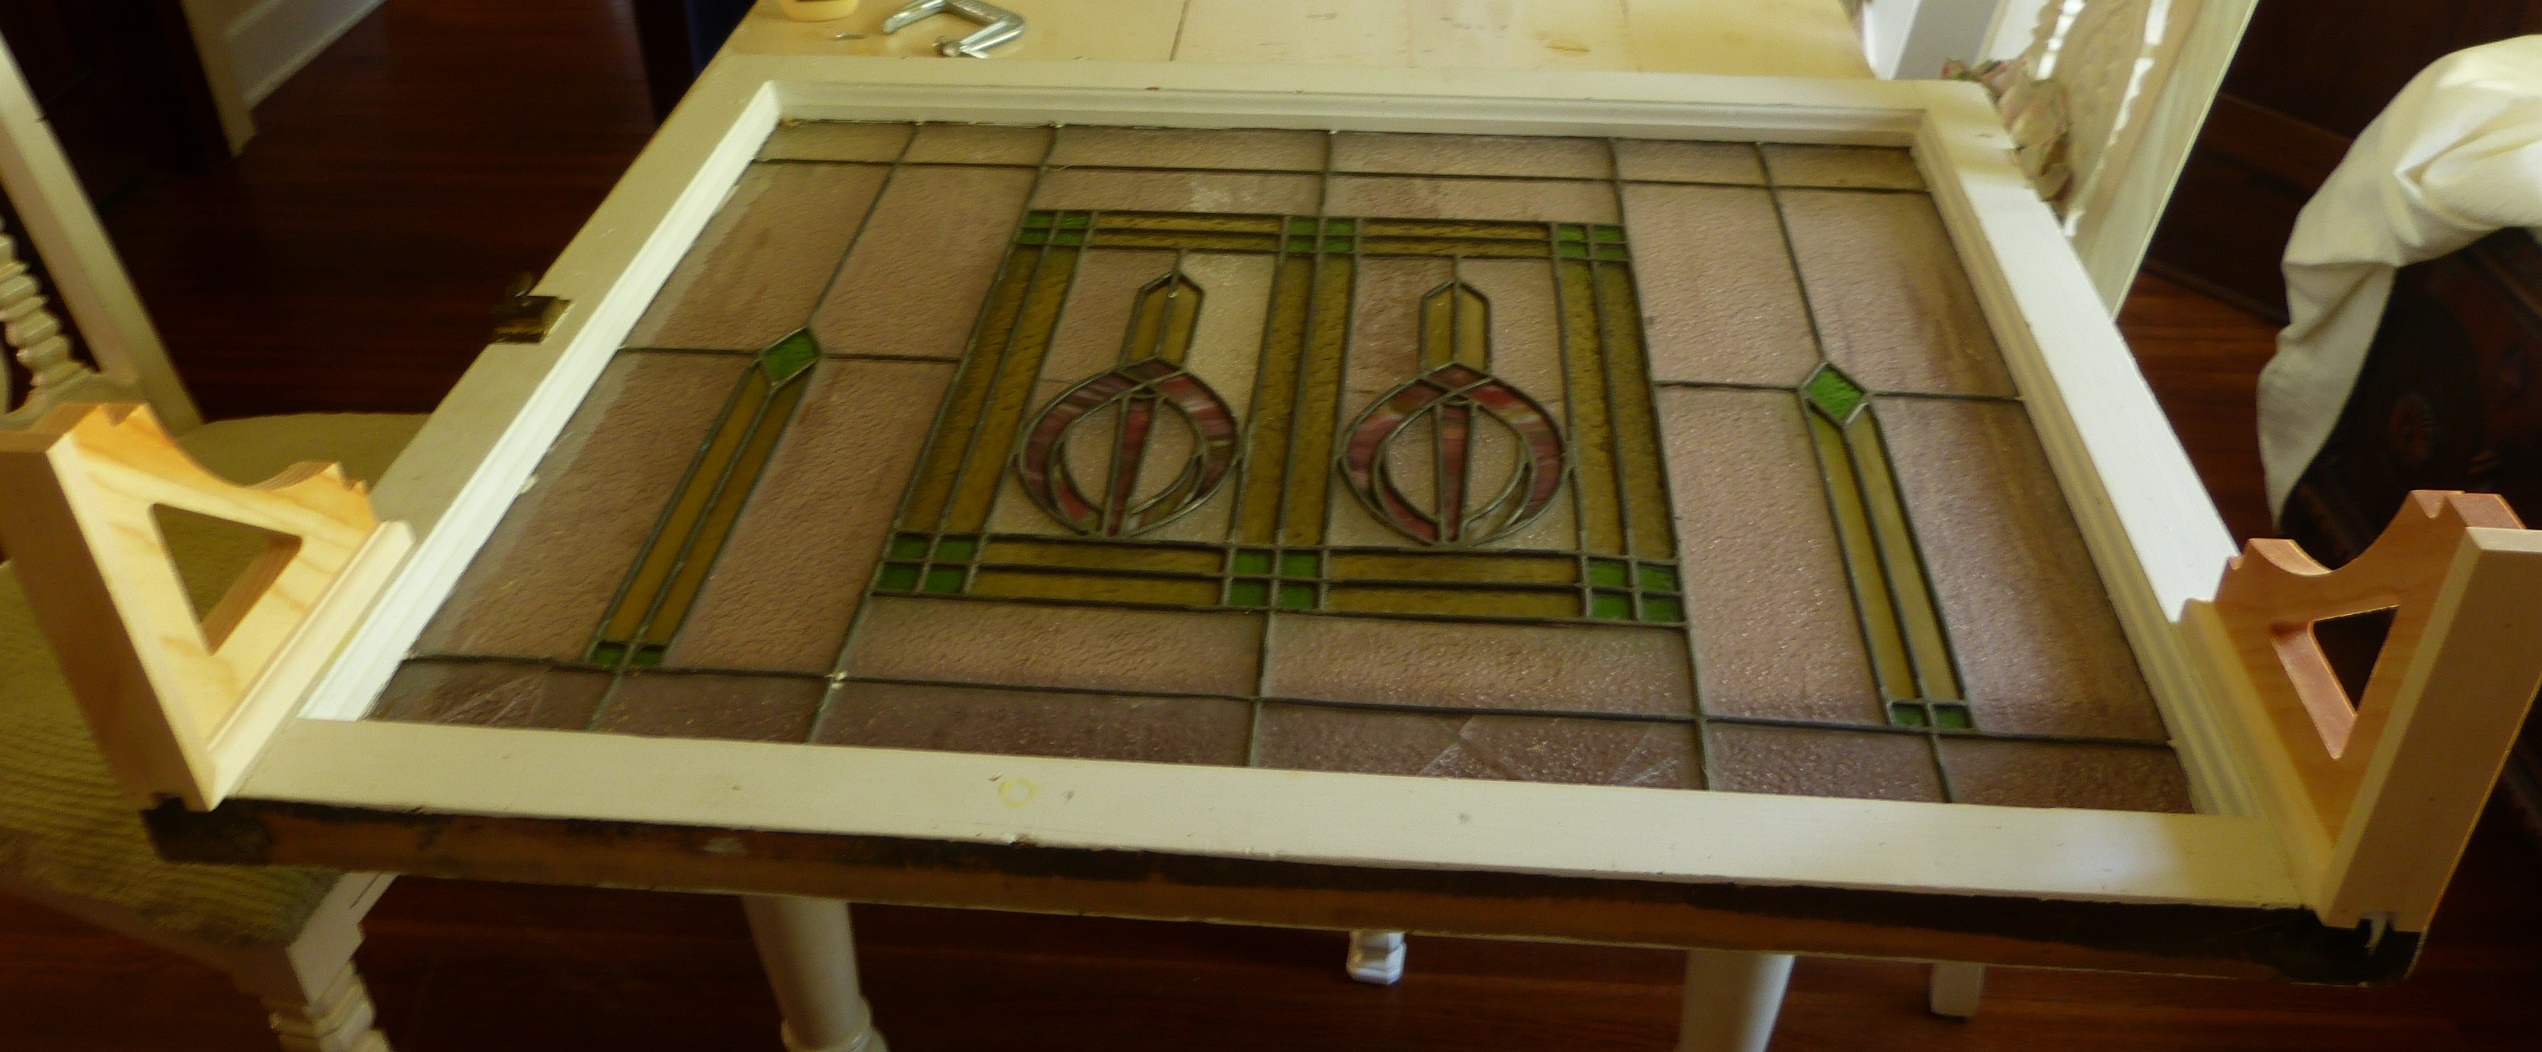 unpainted stained glass window with brackets